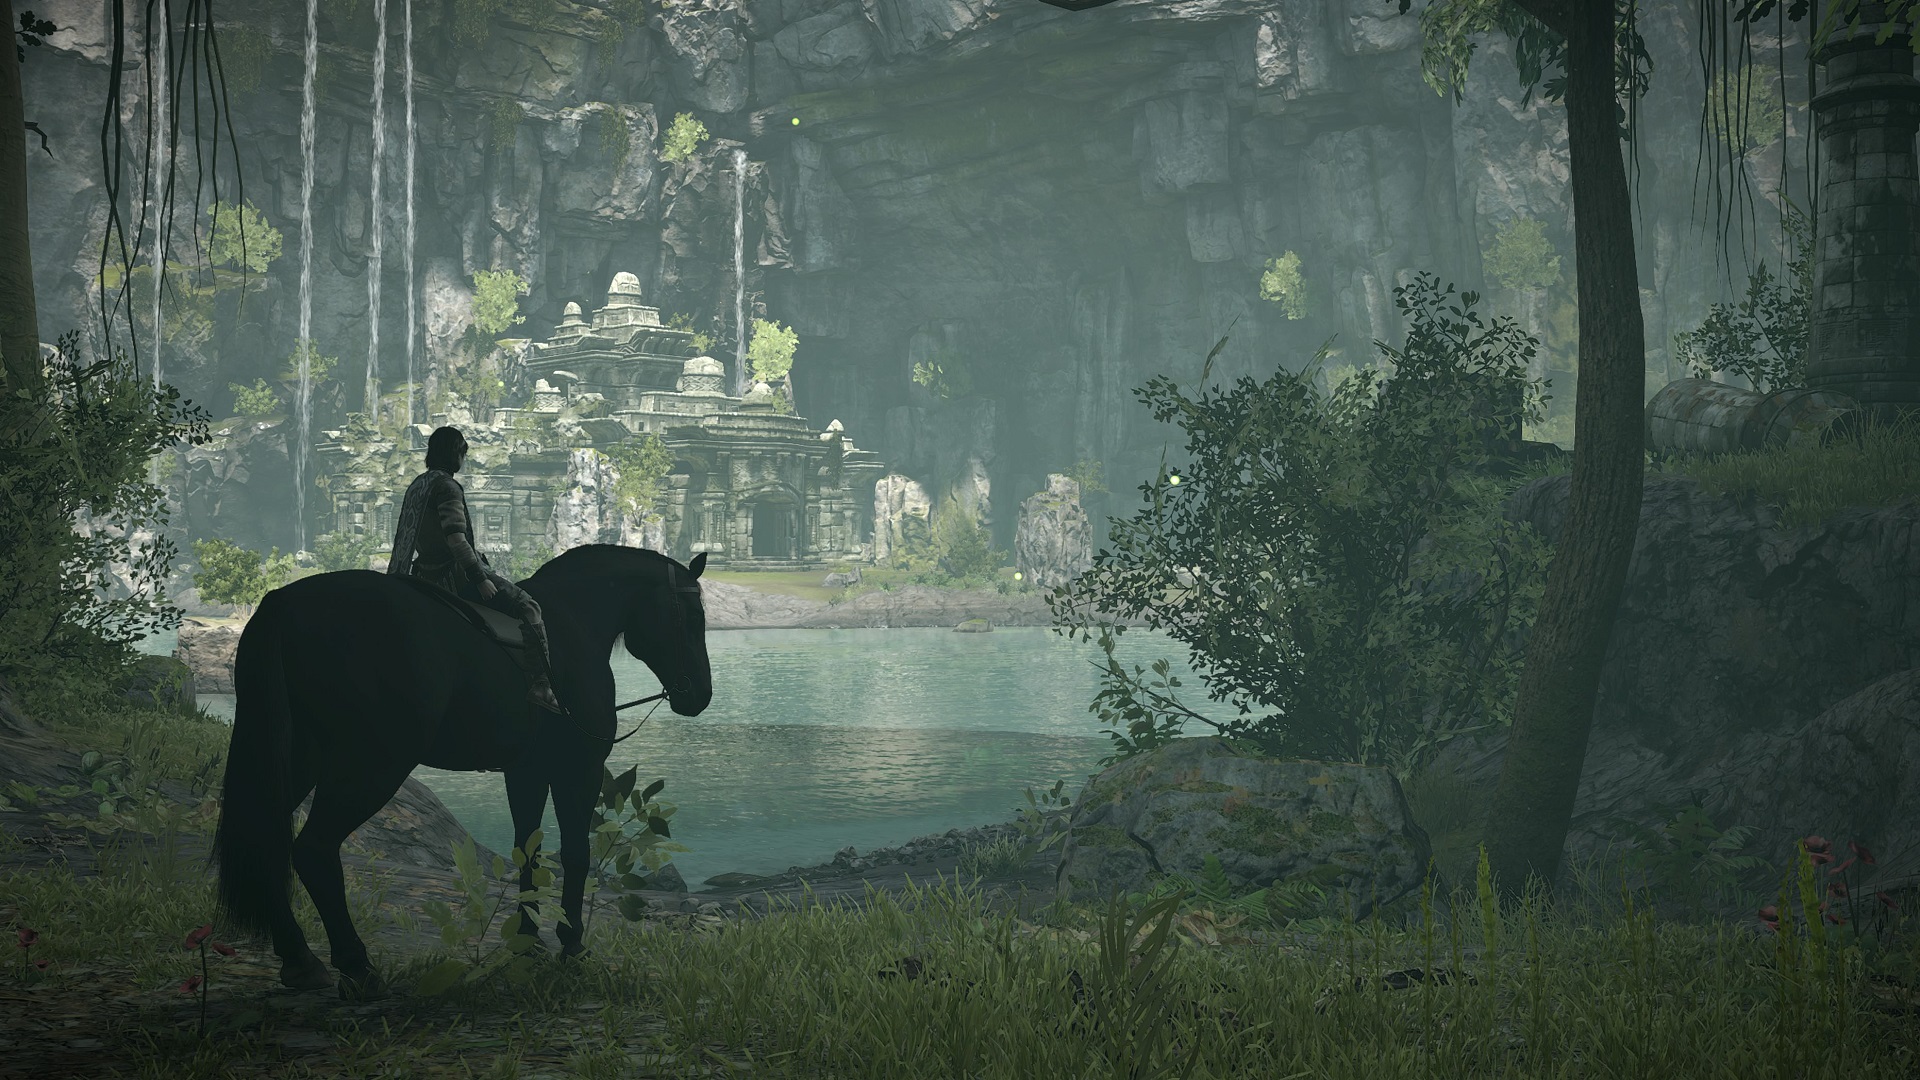 Shadow of the Colossus' Studio Bluepoint is Working on Another Remake